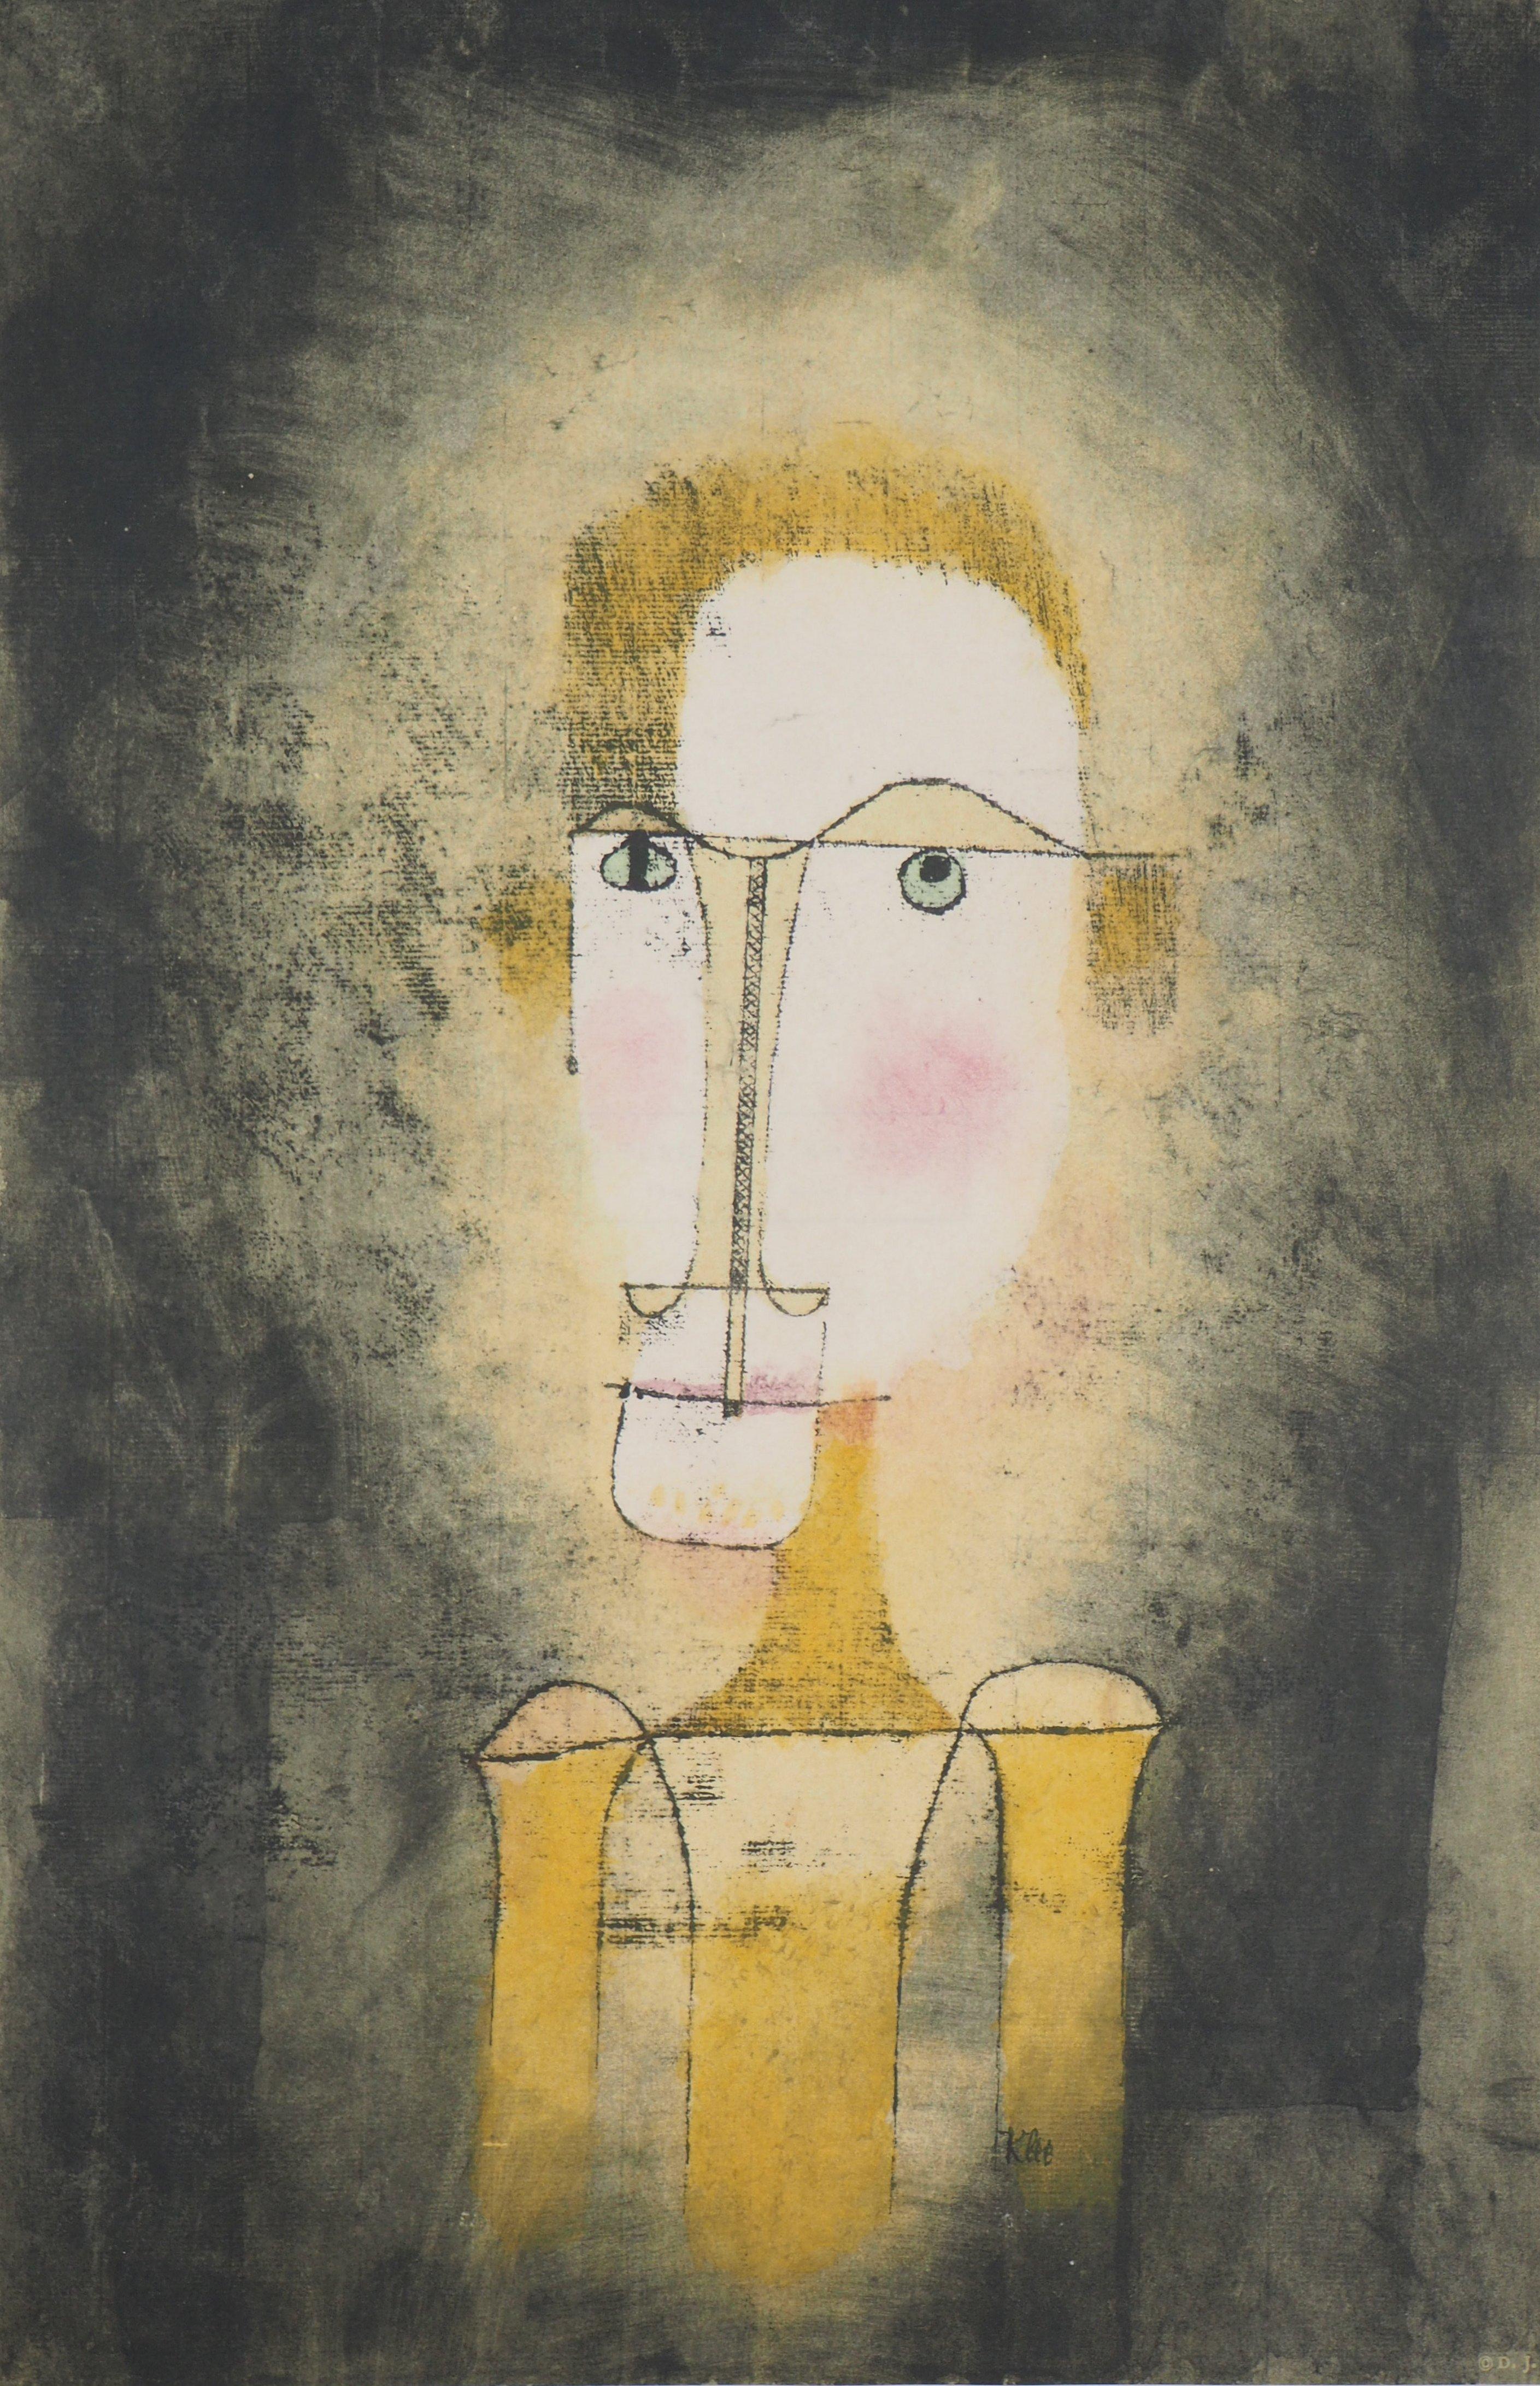 Paul Klee Portrait Print - Portrait in Yellow - Lithograph and Stencil